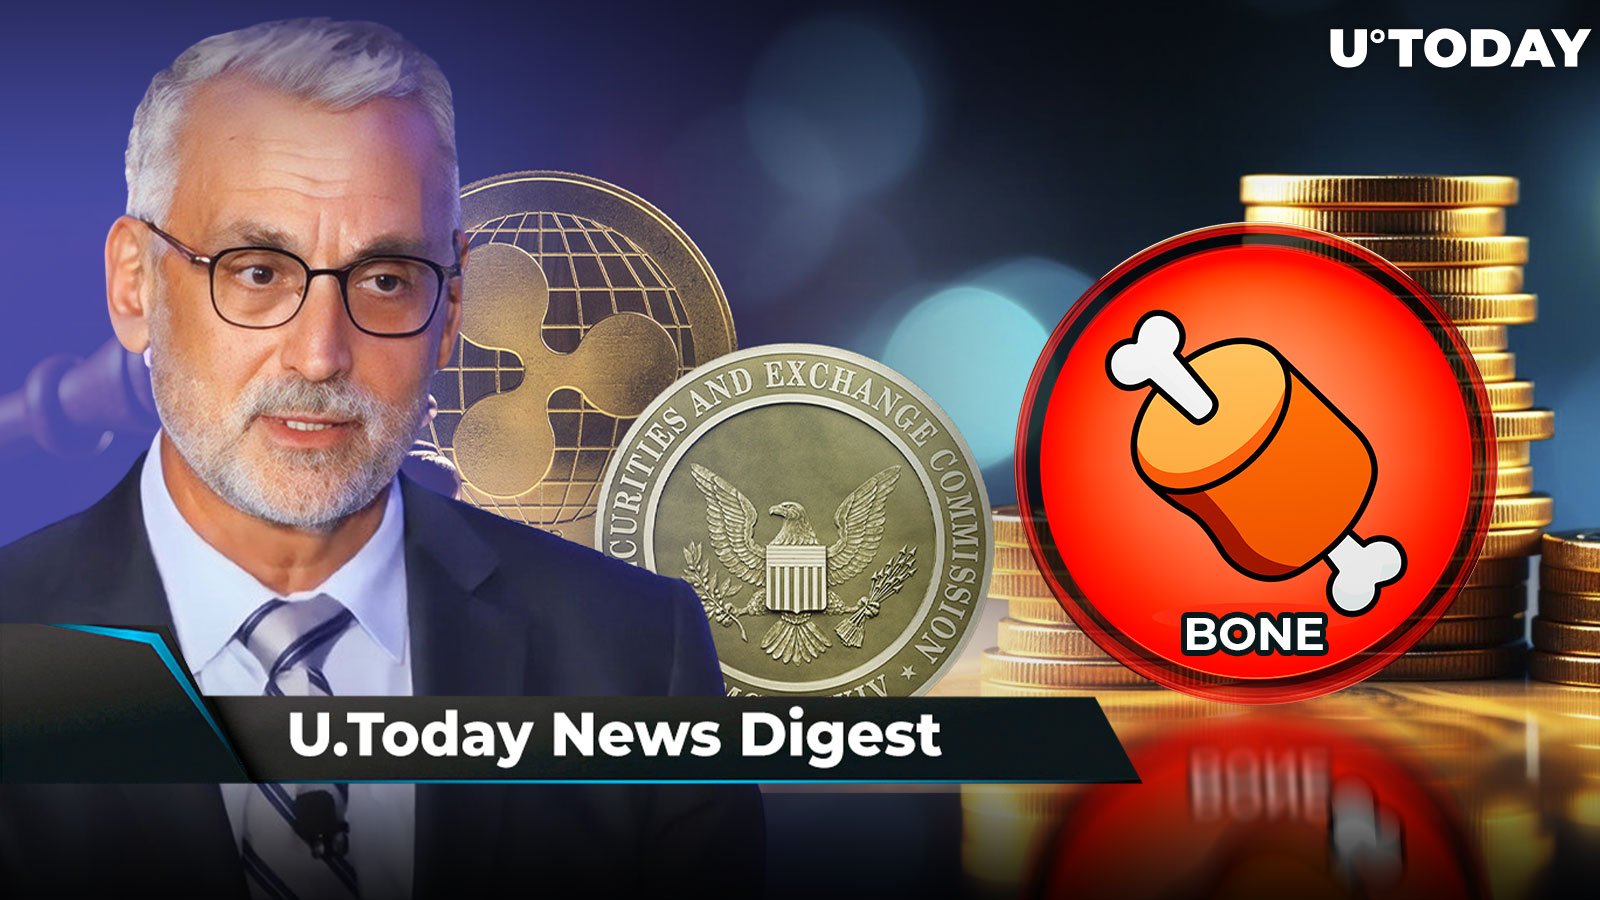 SHIB Team Member Shares Initial Reason Behind BONE Creation, Ripple CLO Teases XRP Case Resolution, Max Keiser Says Bitcoin 'God Candle' Coming: Crypto News Digest by U.Today